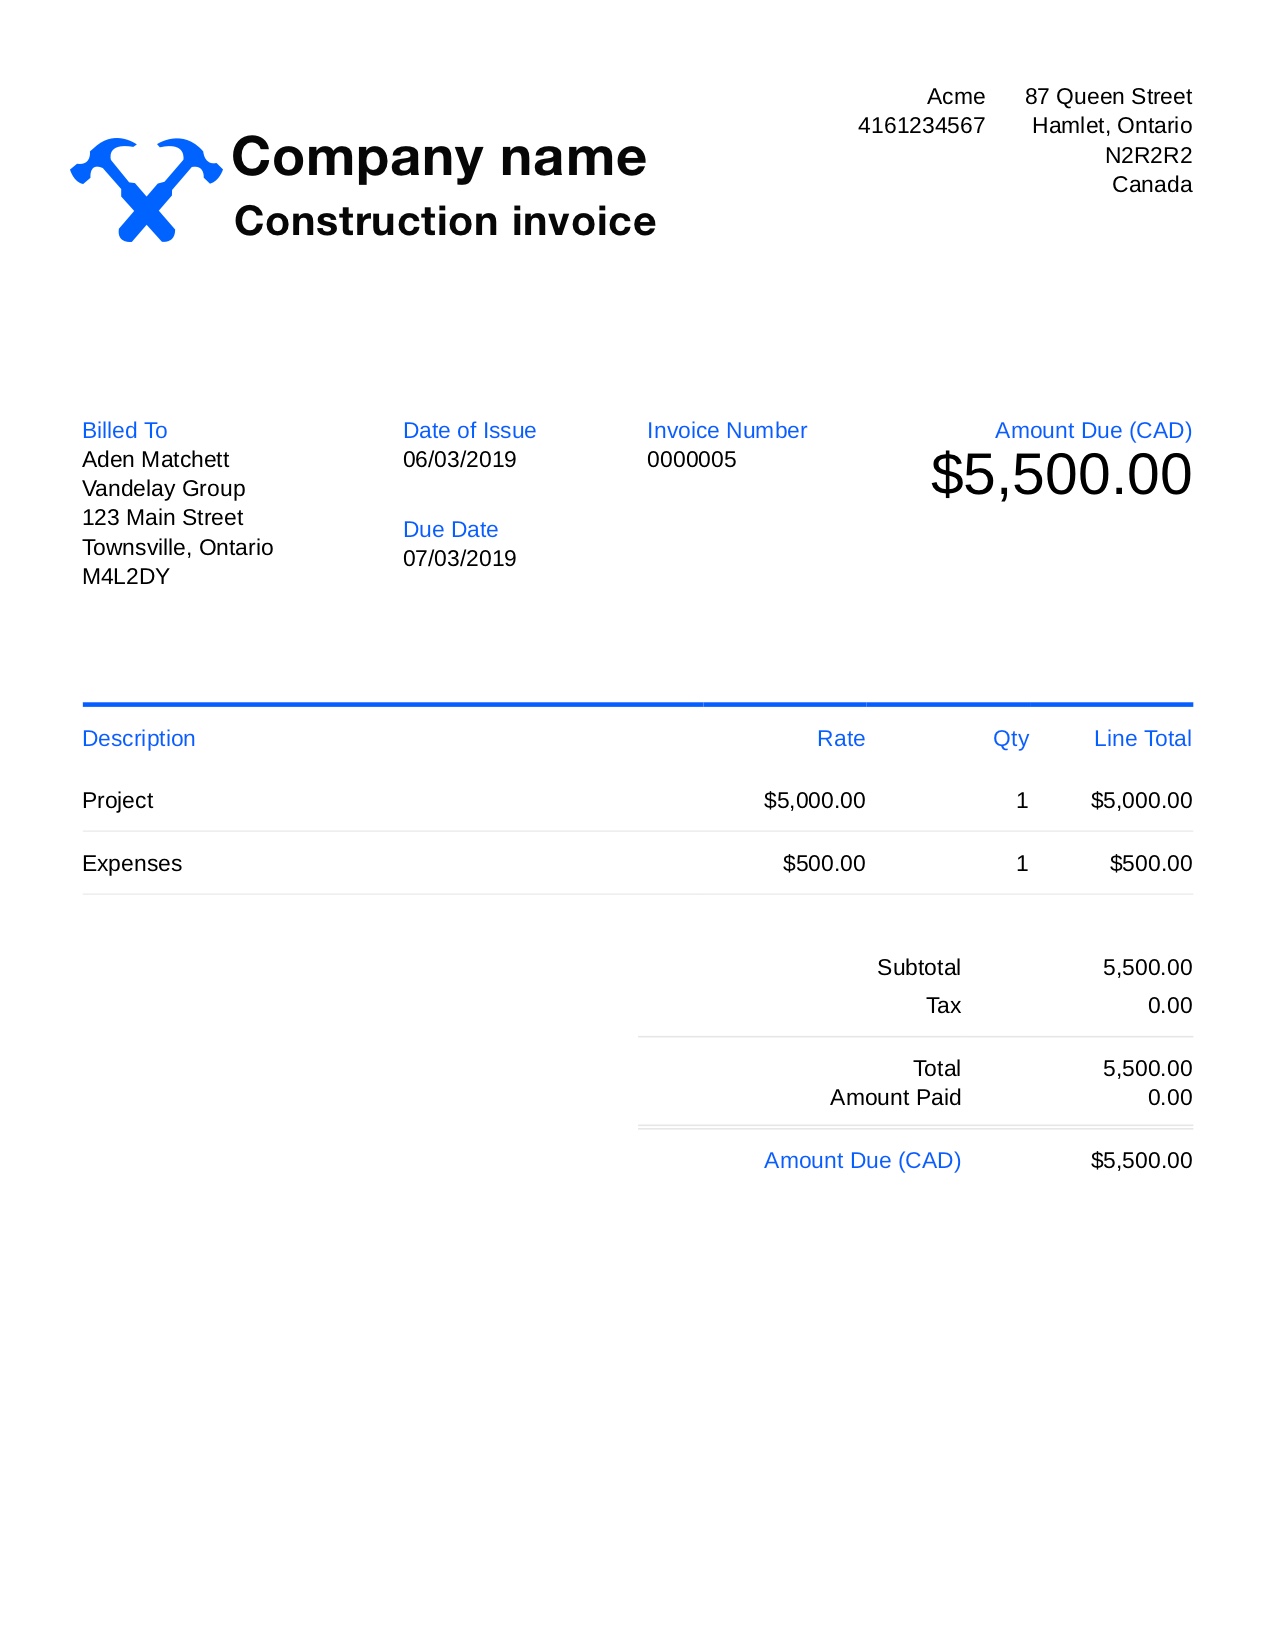 Free Construction Invoice Template. Customize and Send in 21 Seconds With Invoice Template For Builders